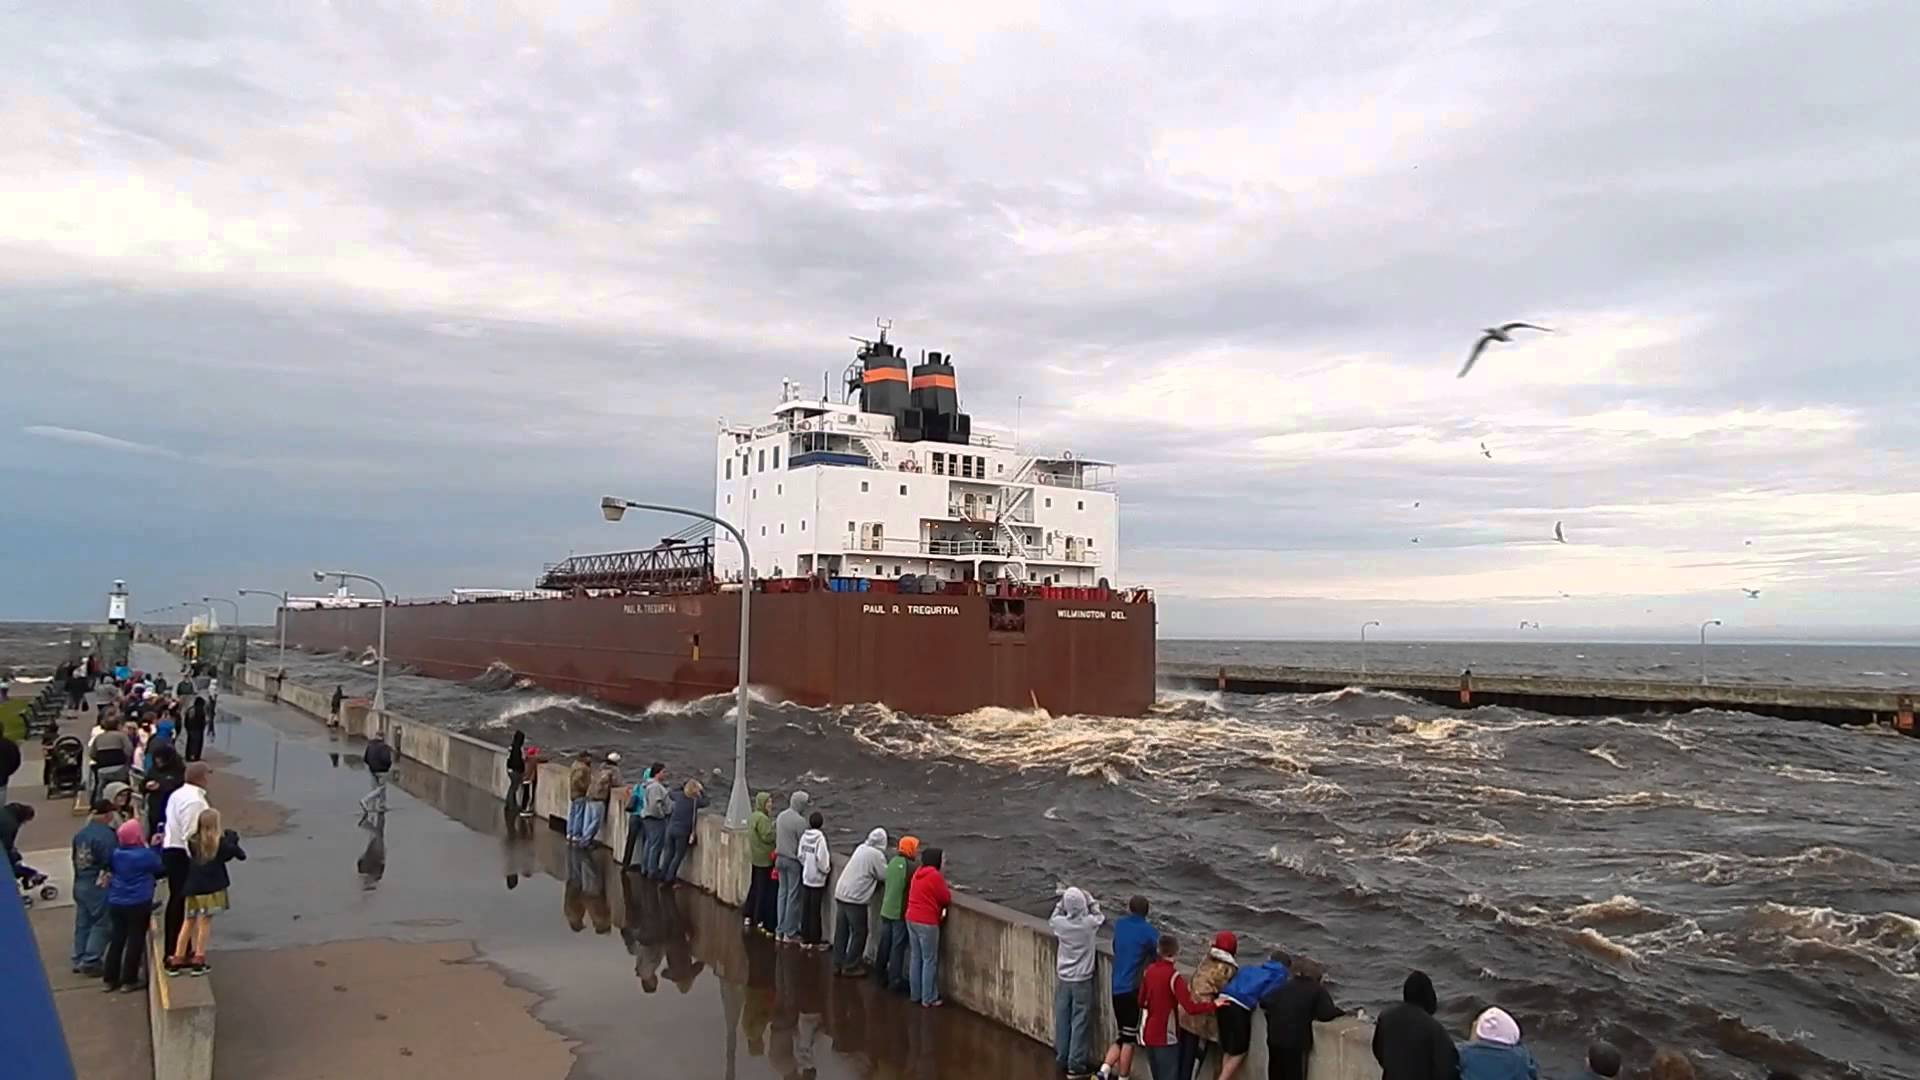 Giant ship going under the Lift Bridge in Duluth, MN